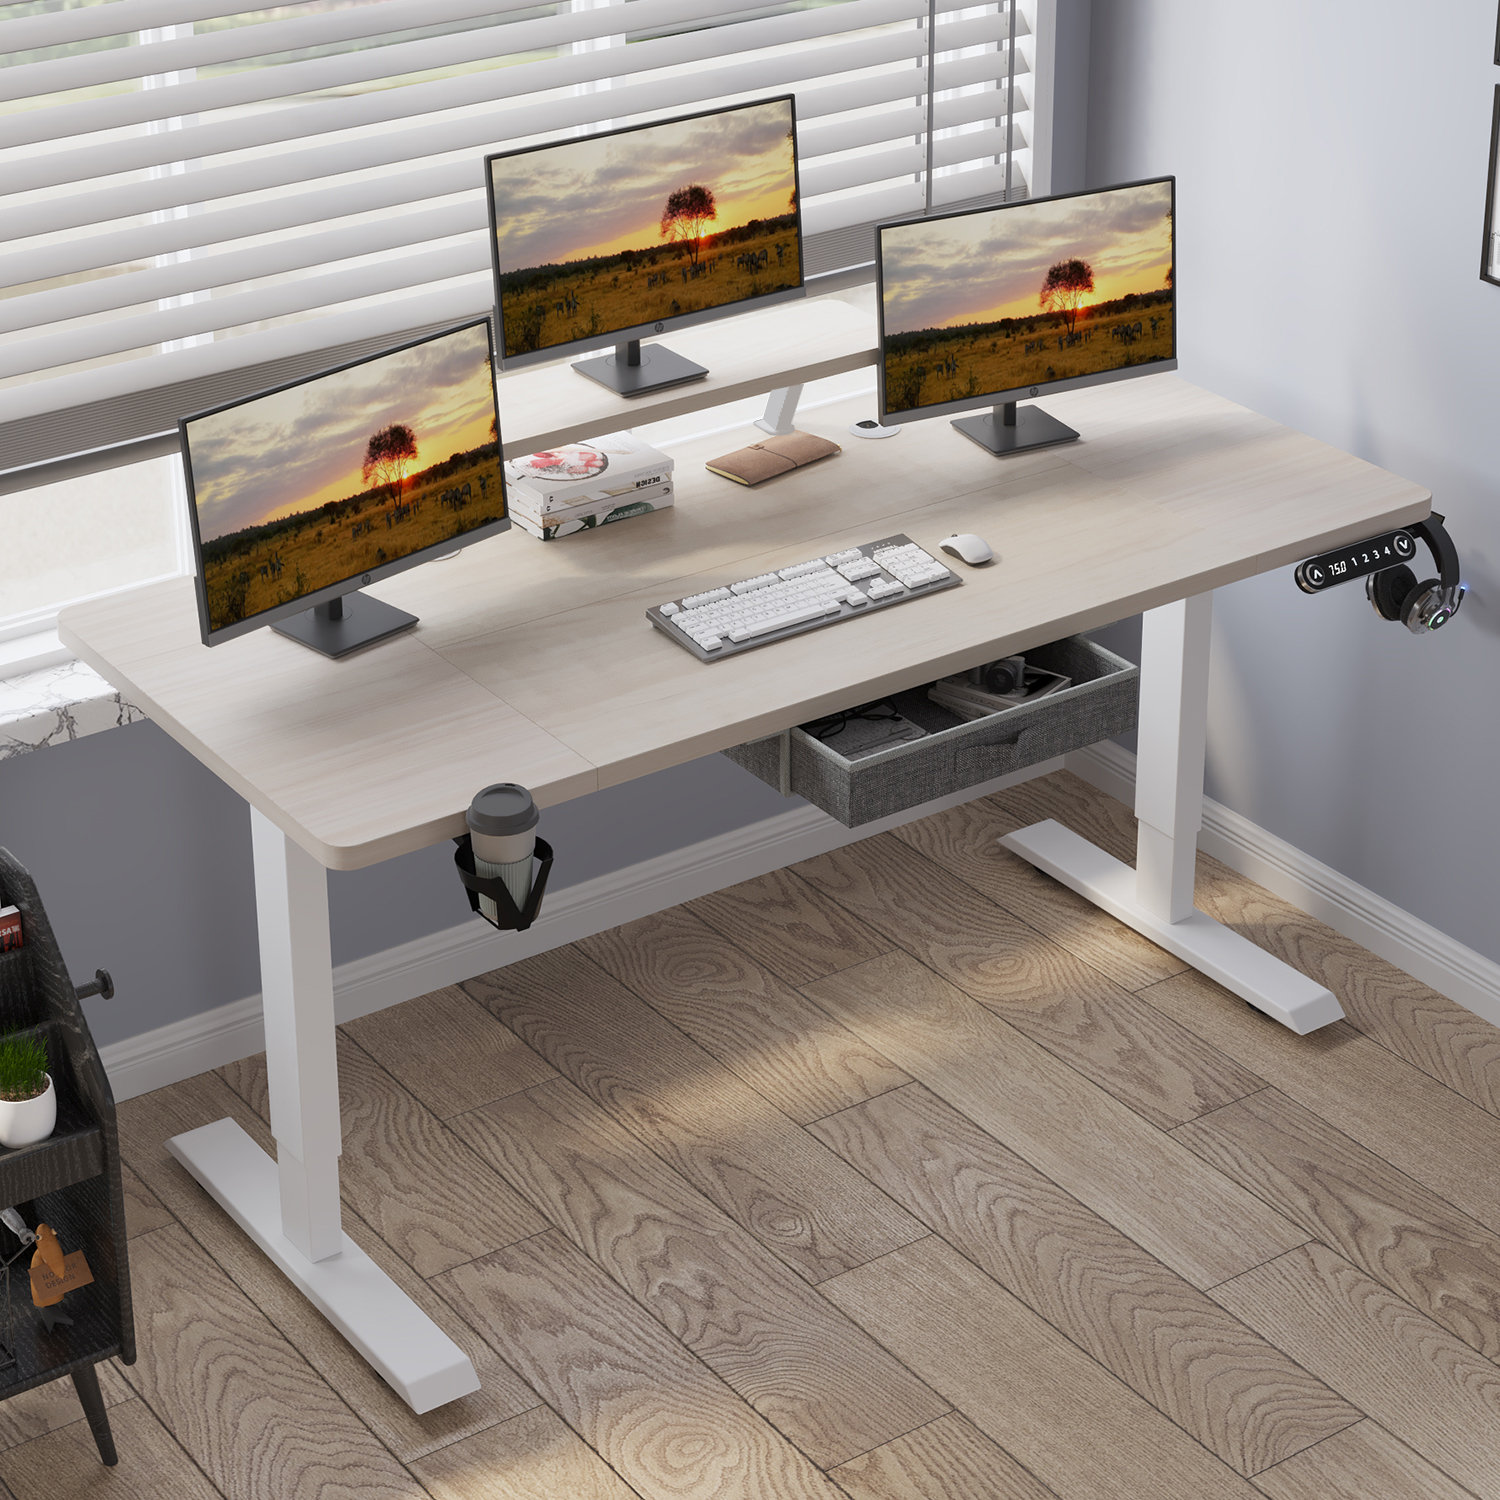 SHW Electric Height-Adjustable Computer Desk review